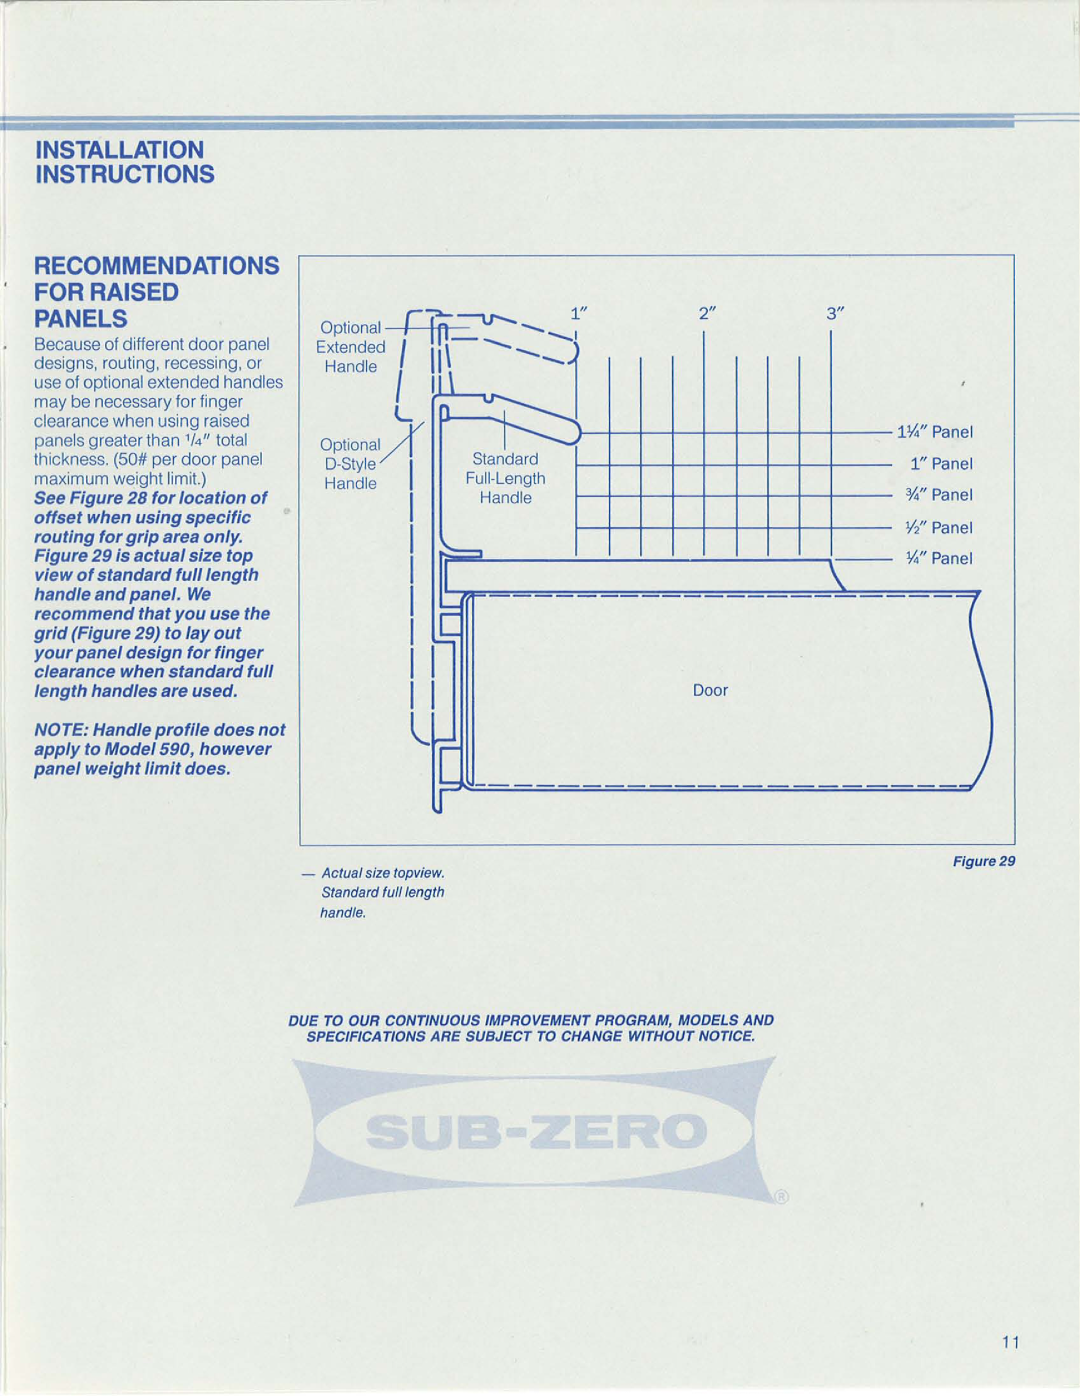 Sub-Zero 550, 590, 511, 532, 561, 542 manual f-m=, Installation Instructions Recommendations, Panels, ii, For Raised 